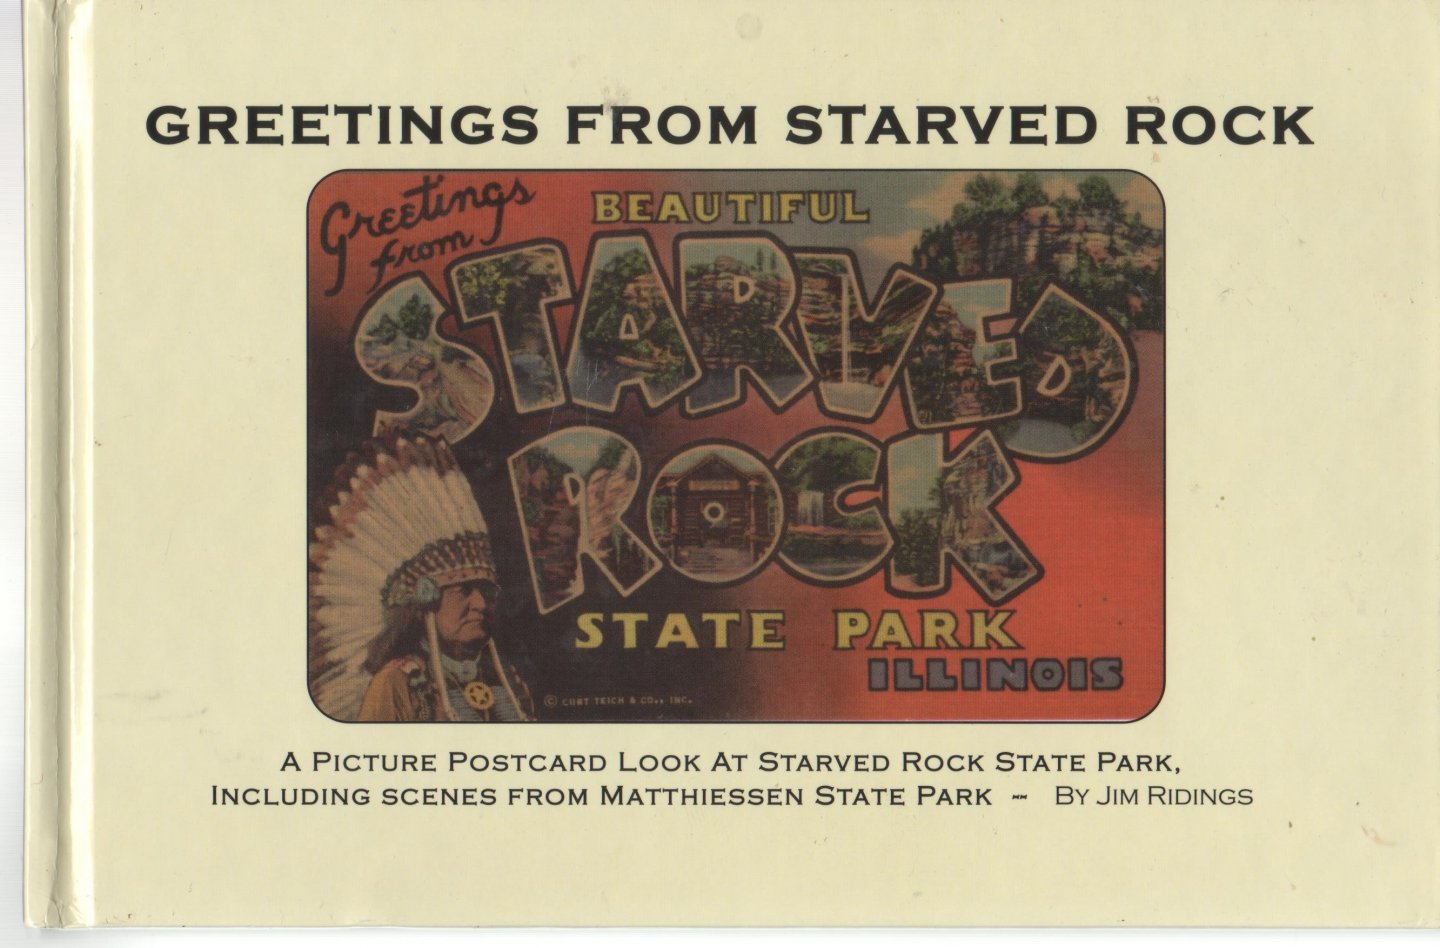 Ridings, Jim - Greetings from starved rock